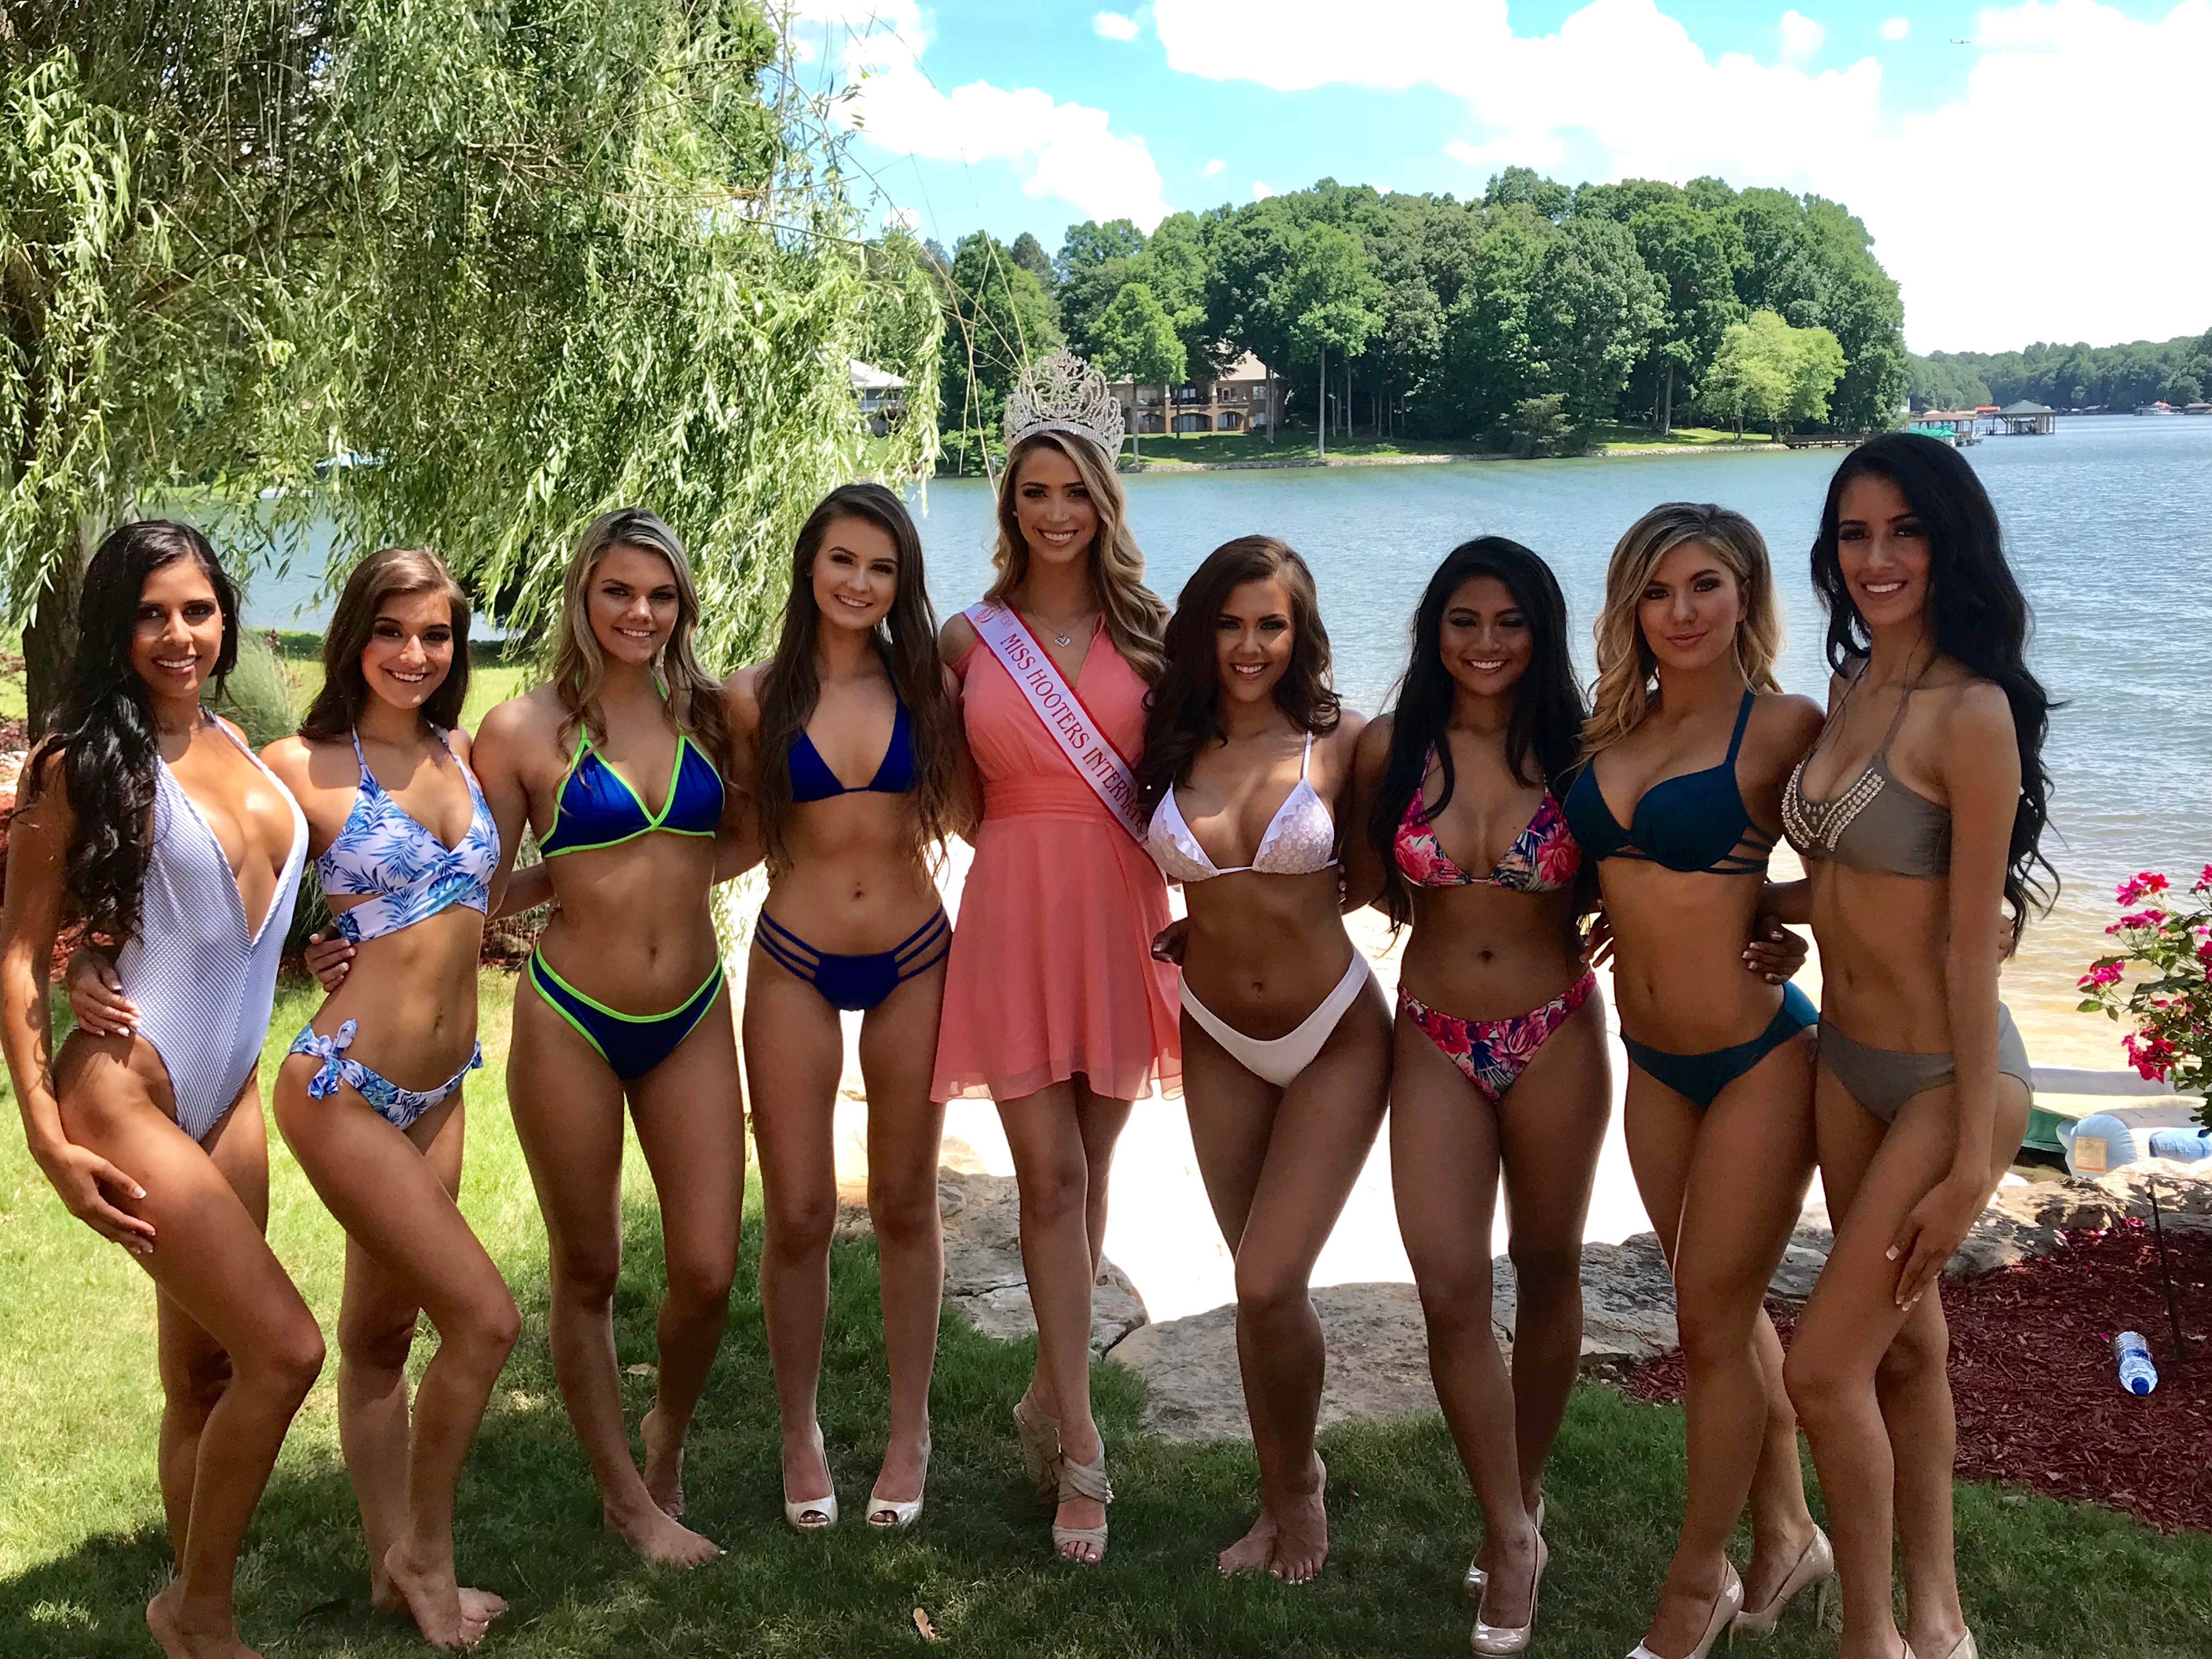 Hooters Pageant and Women's Conference Goes Beyond the Orange